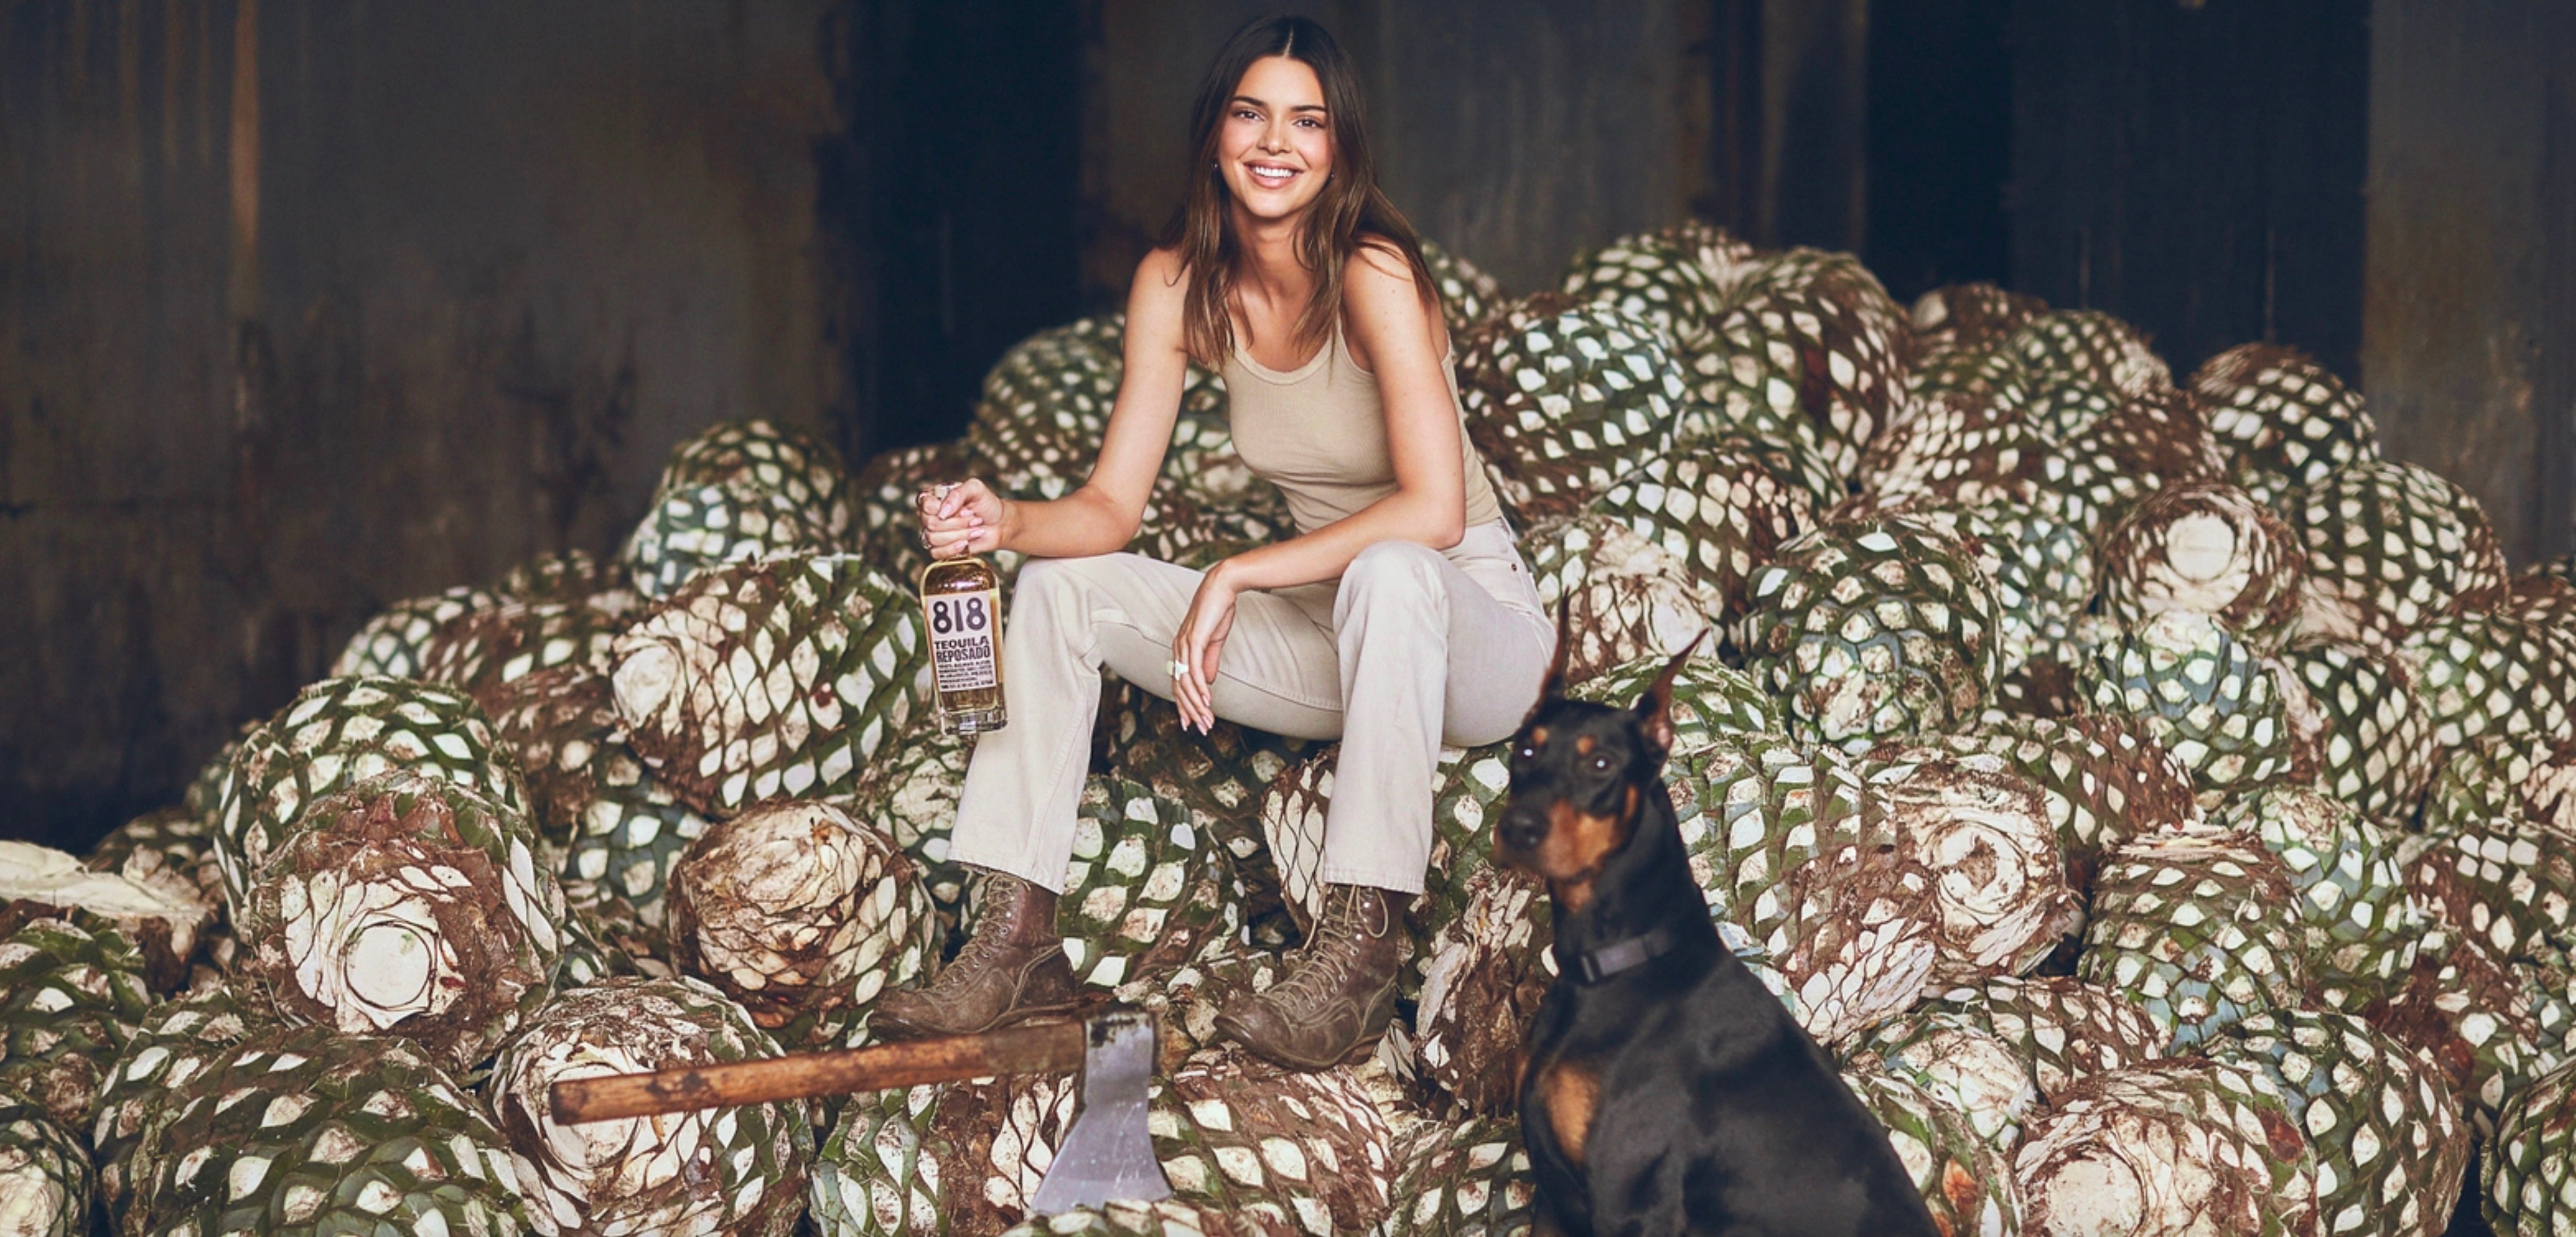 818 Reposado Tequila by Kendall Jenner